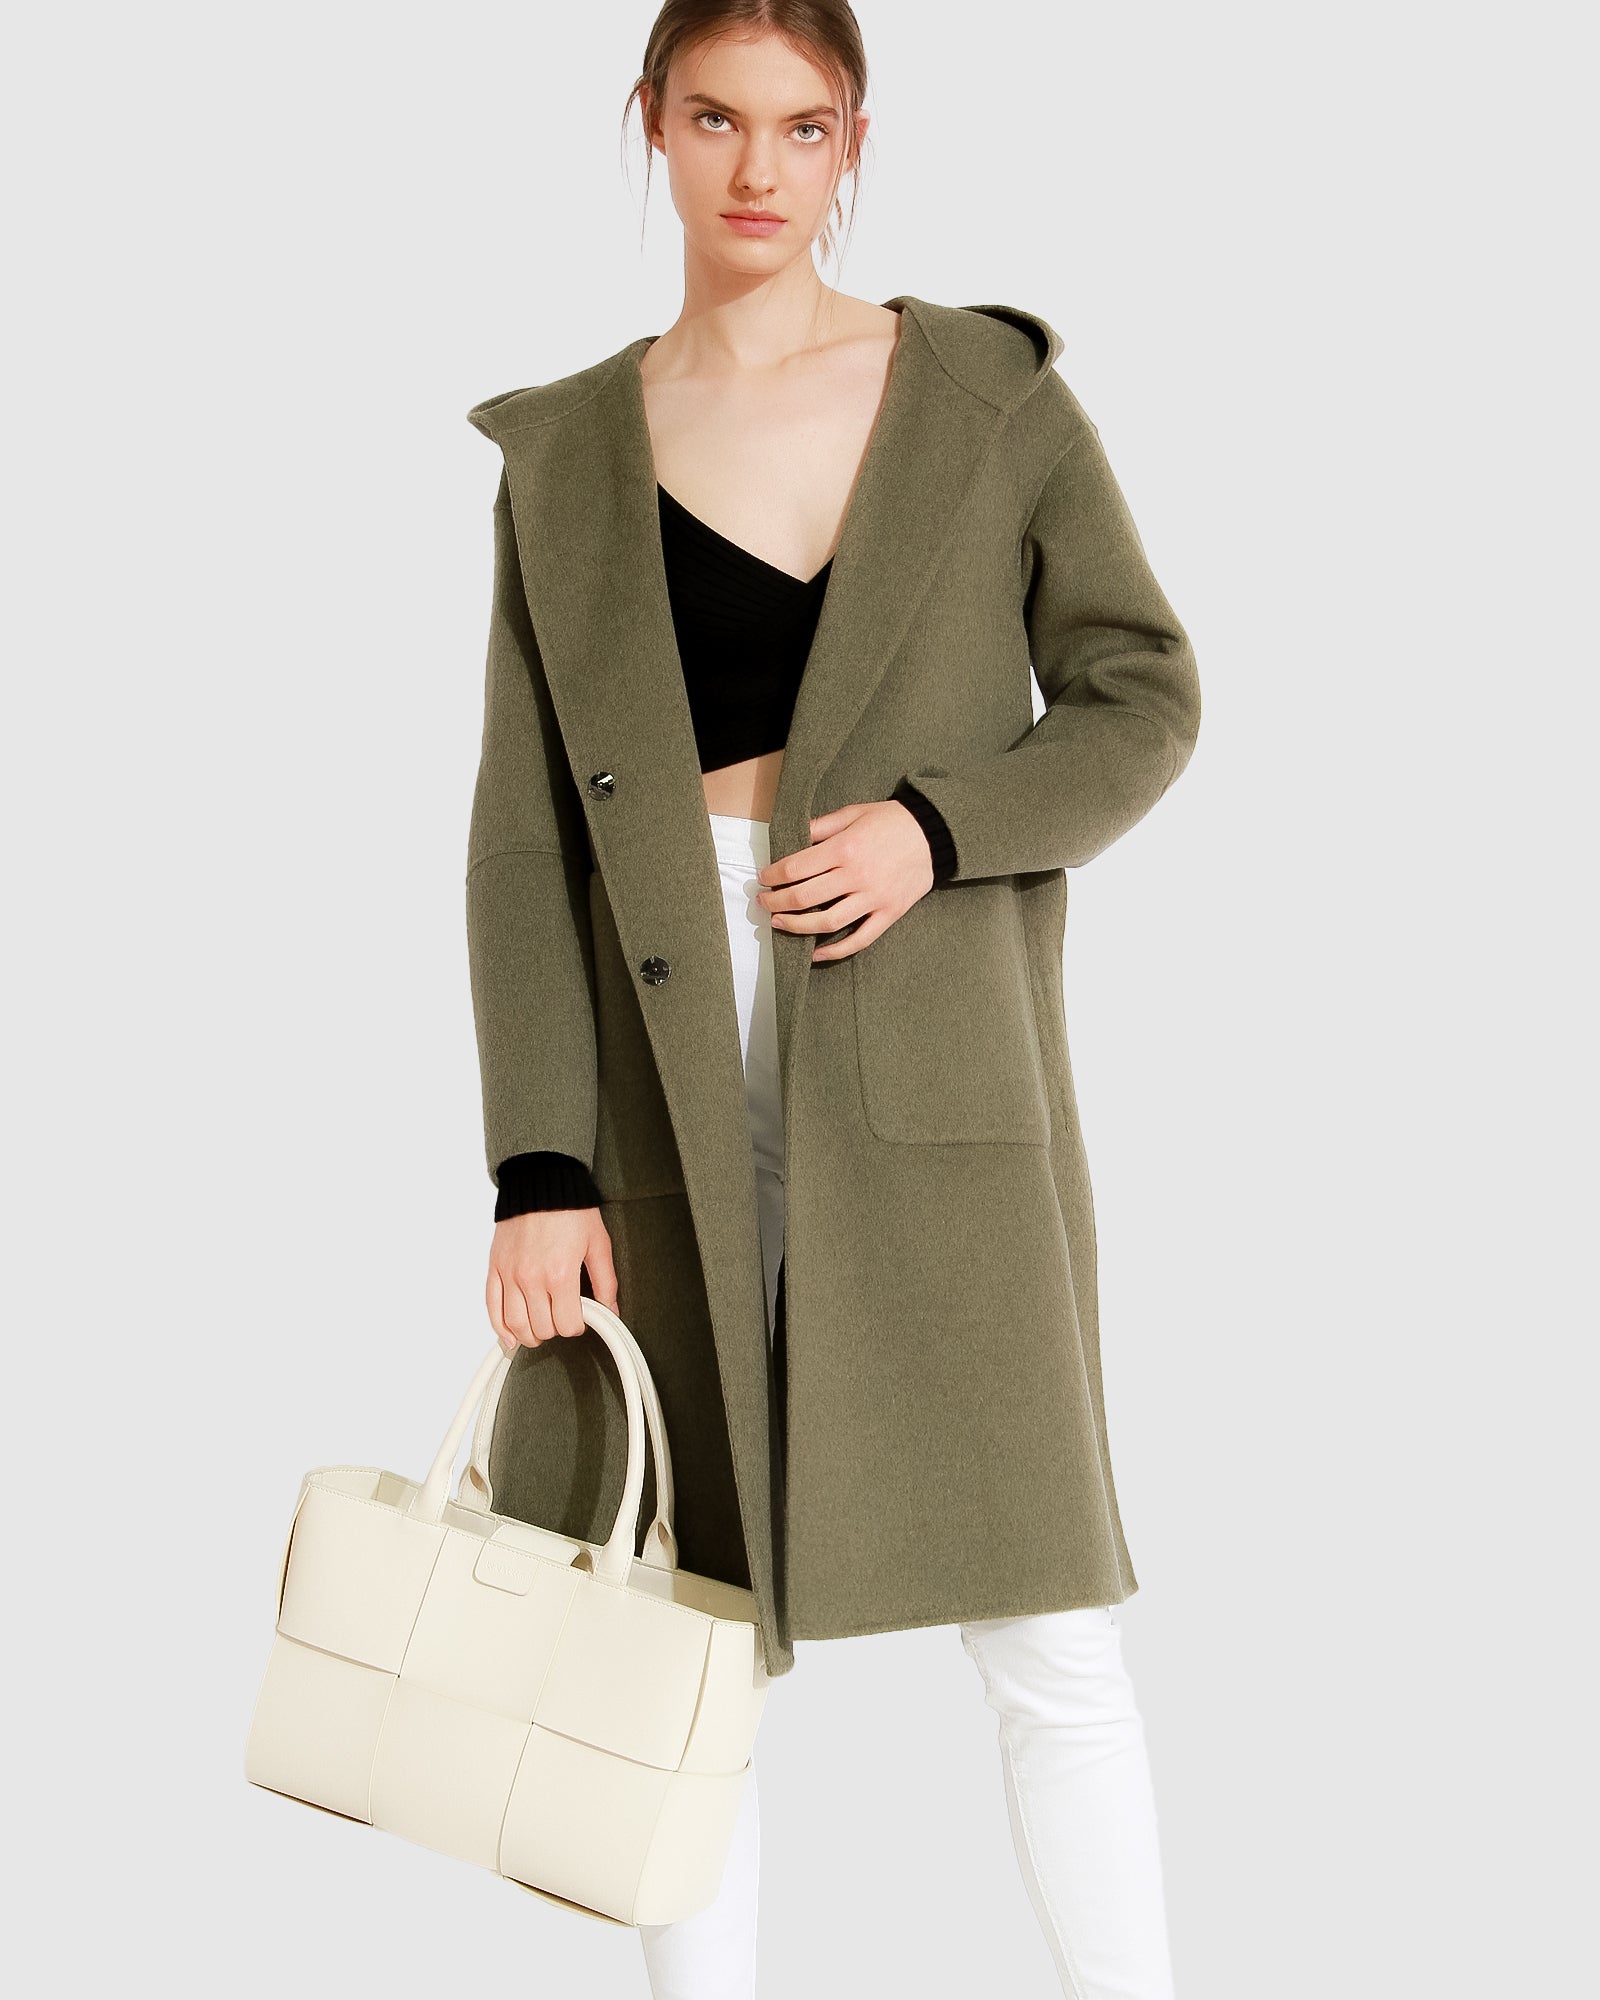 Walk This Way Wool Blend Oversized Coat - Army Green